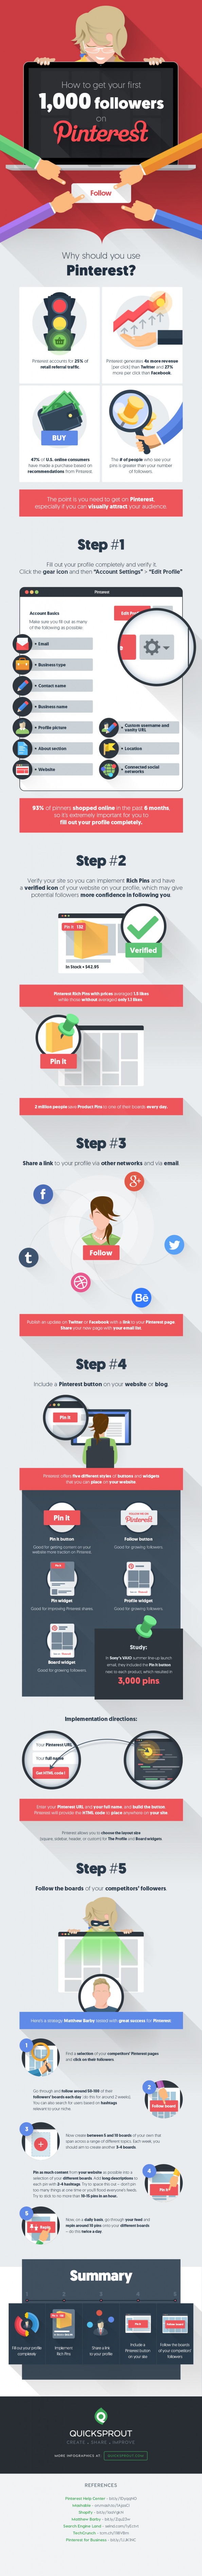 How-to-get-your-first-1000-followers-on-Pinterest